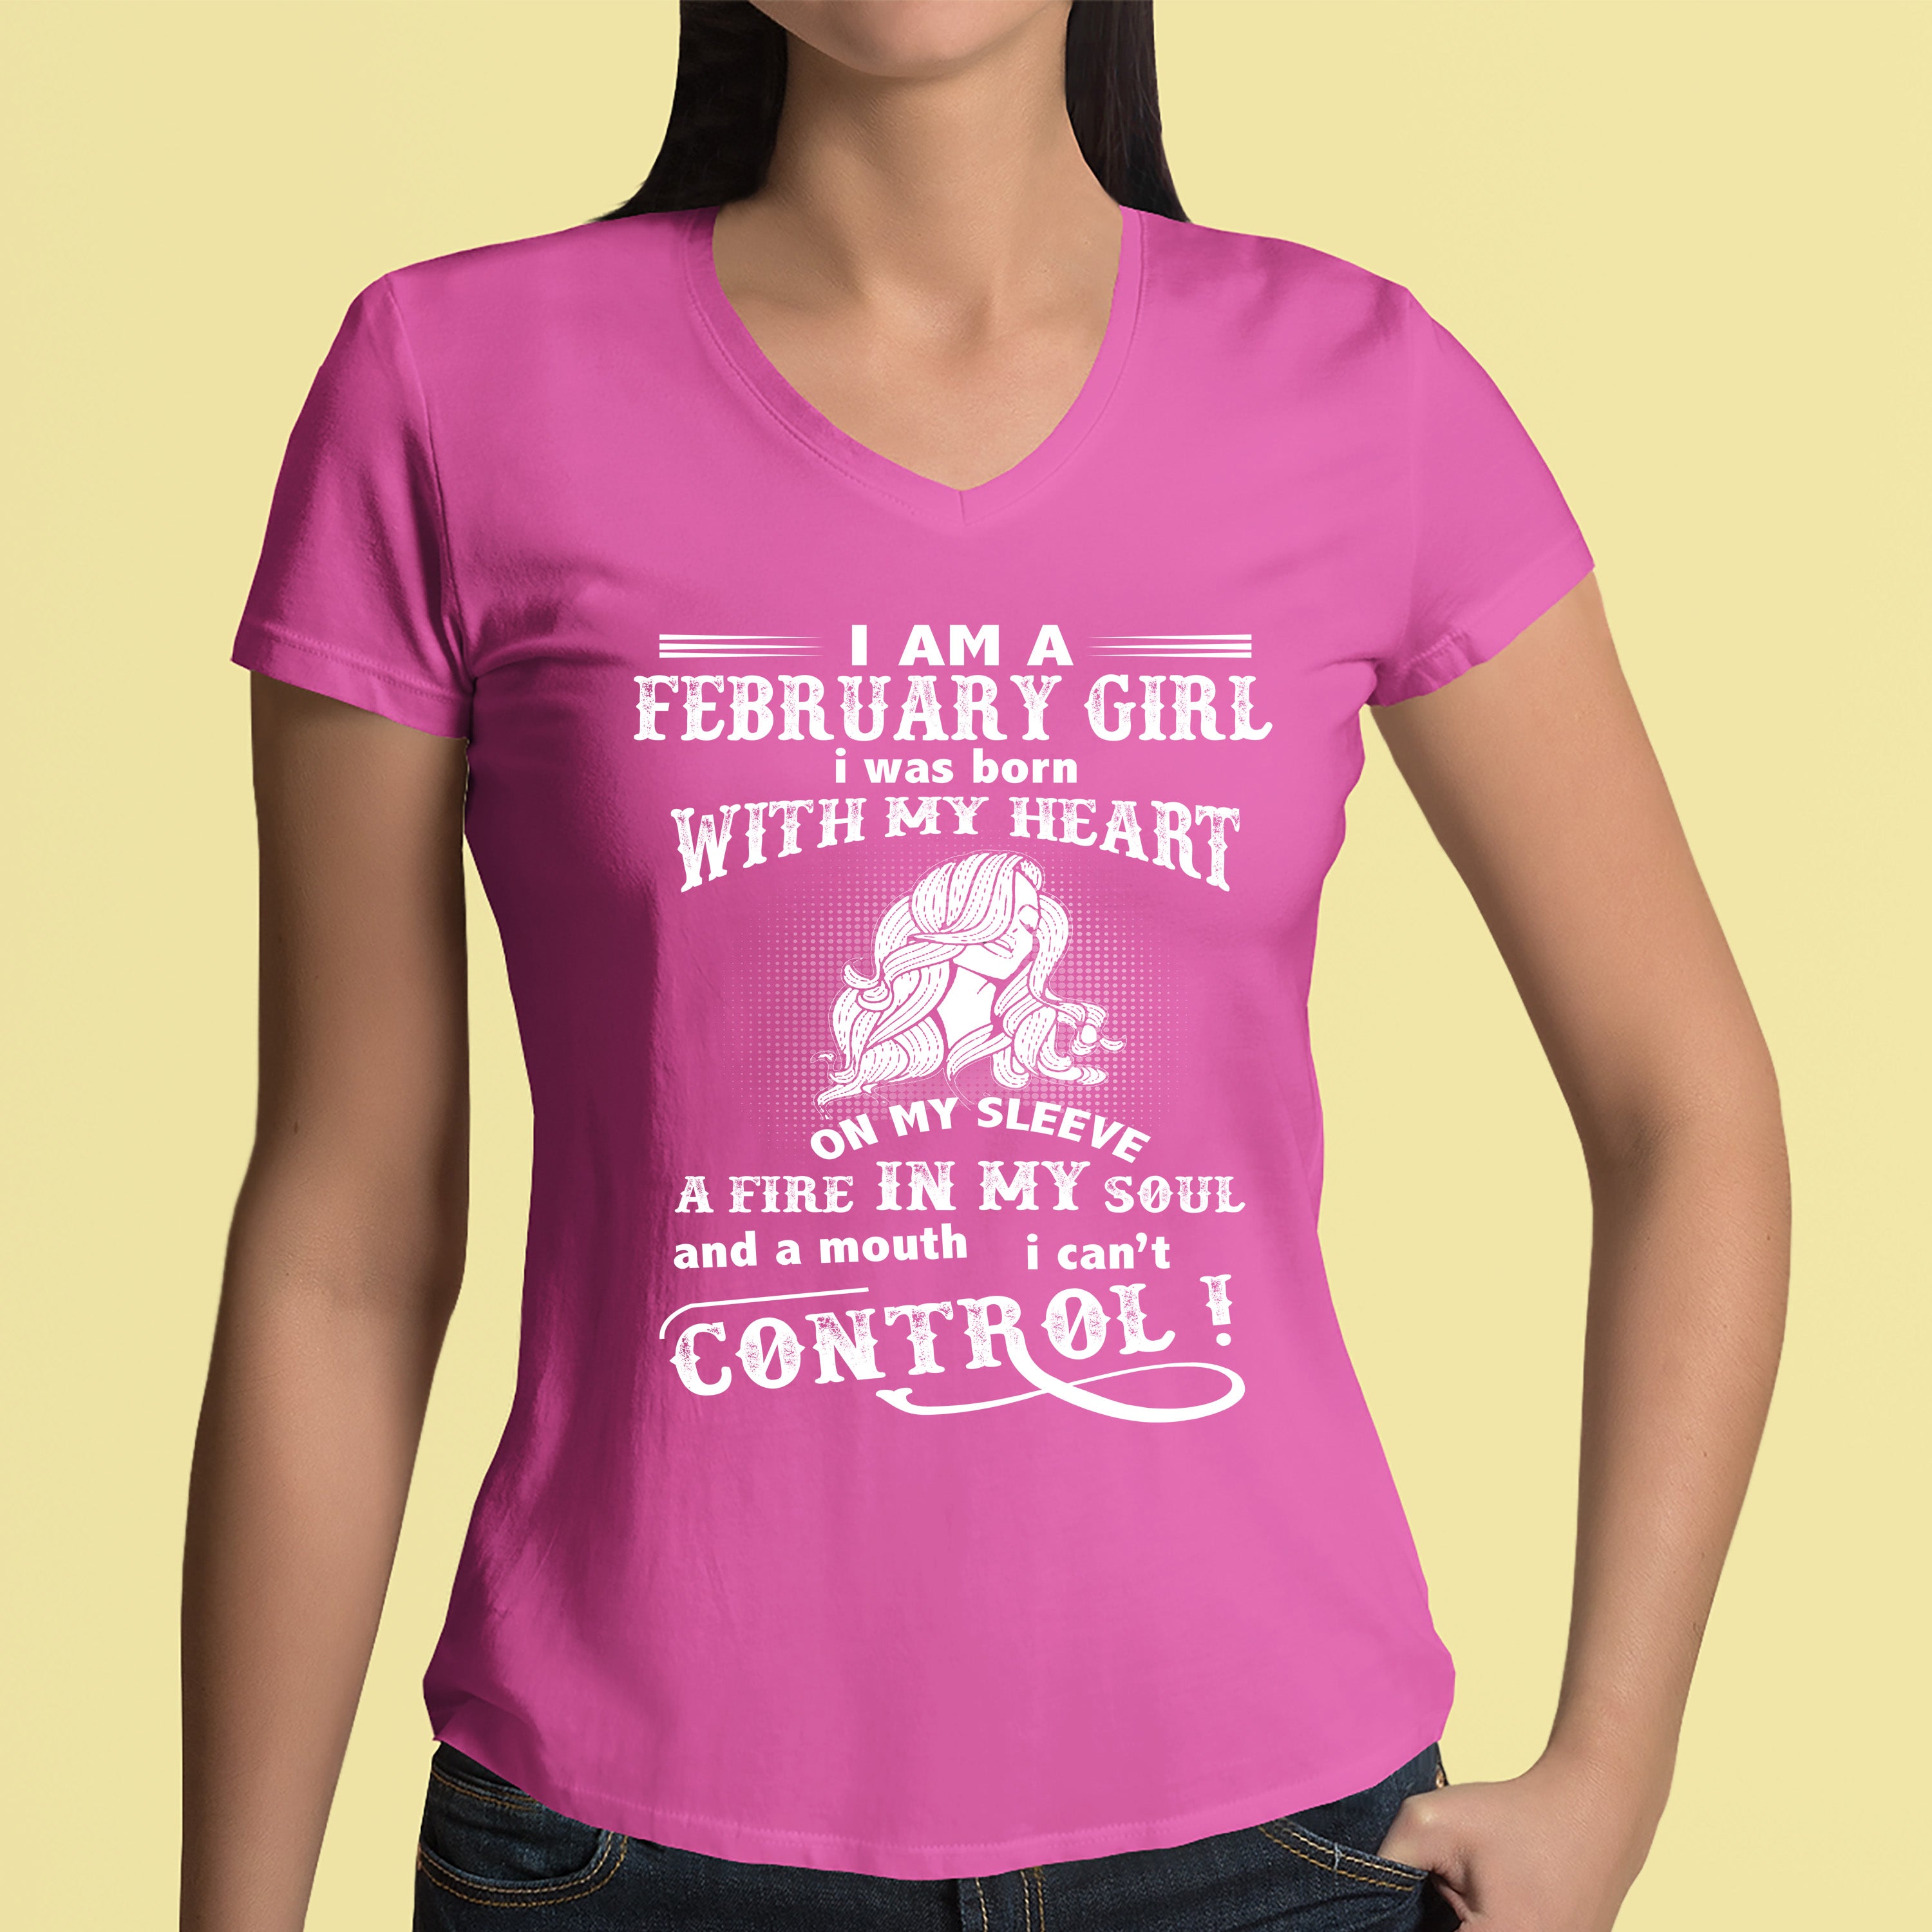 "A Fire In My Soul And A Mouth I Can't Control February Girl" -Pink